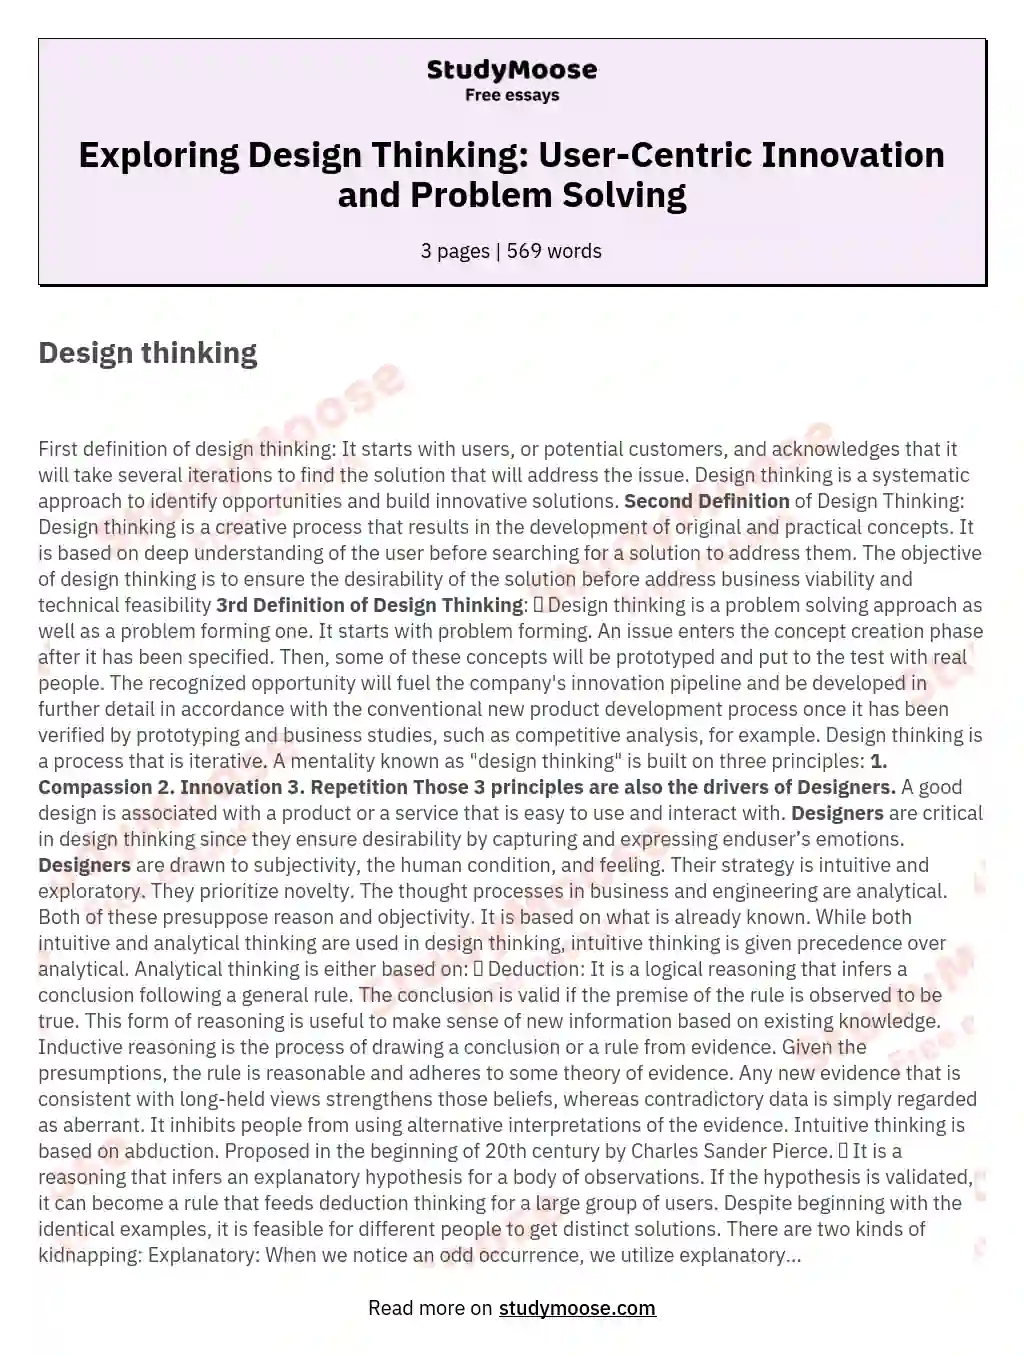 Exploring Design Thinking: User-Centric Innovation and Problem Solving essay